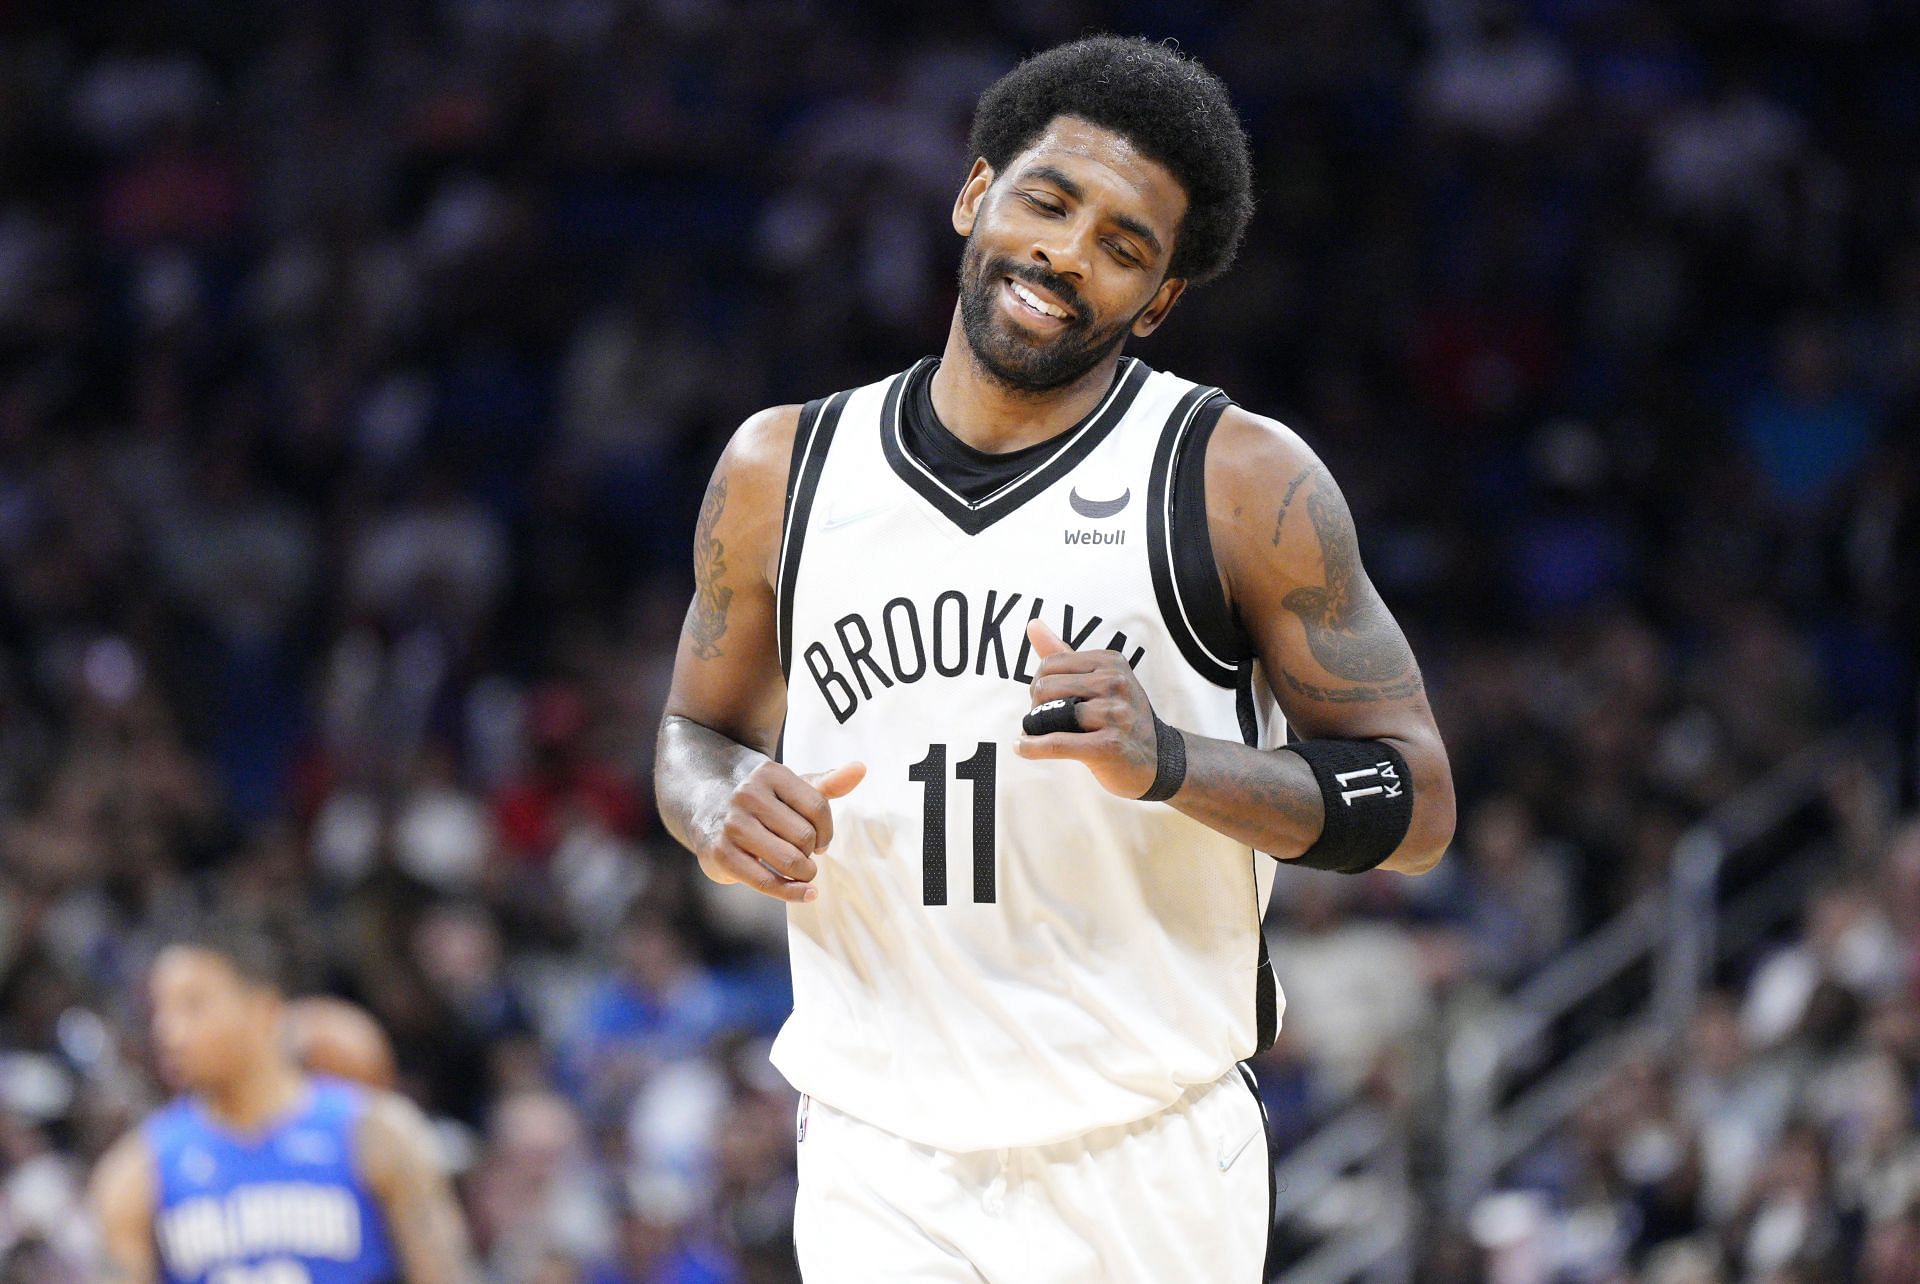 Kyrie Irving #11 of the Brooklyn Nets can now feature in home games as the Mayor of New York exempts athletes from the vaccination mandate.